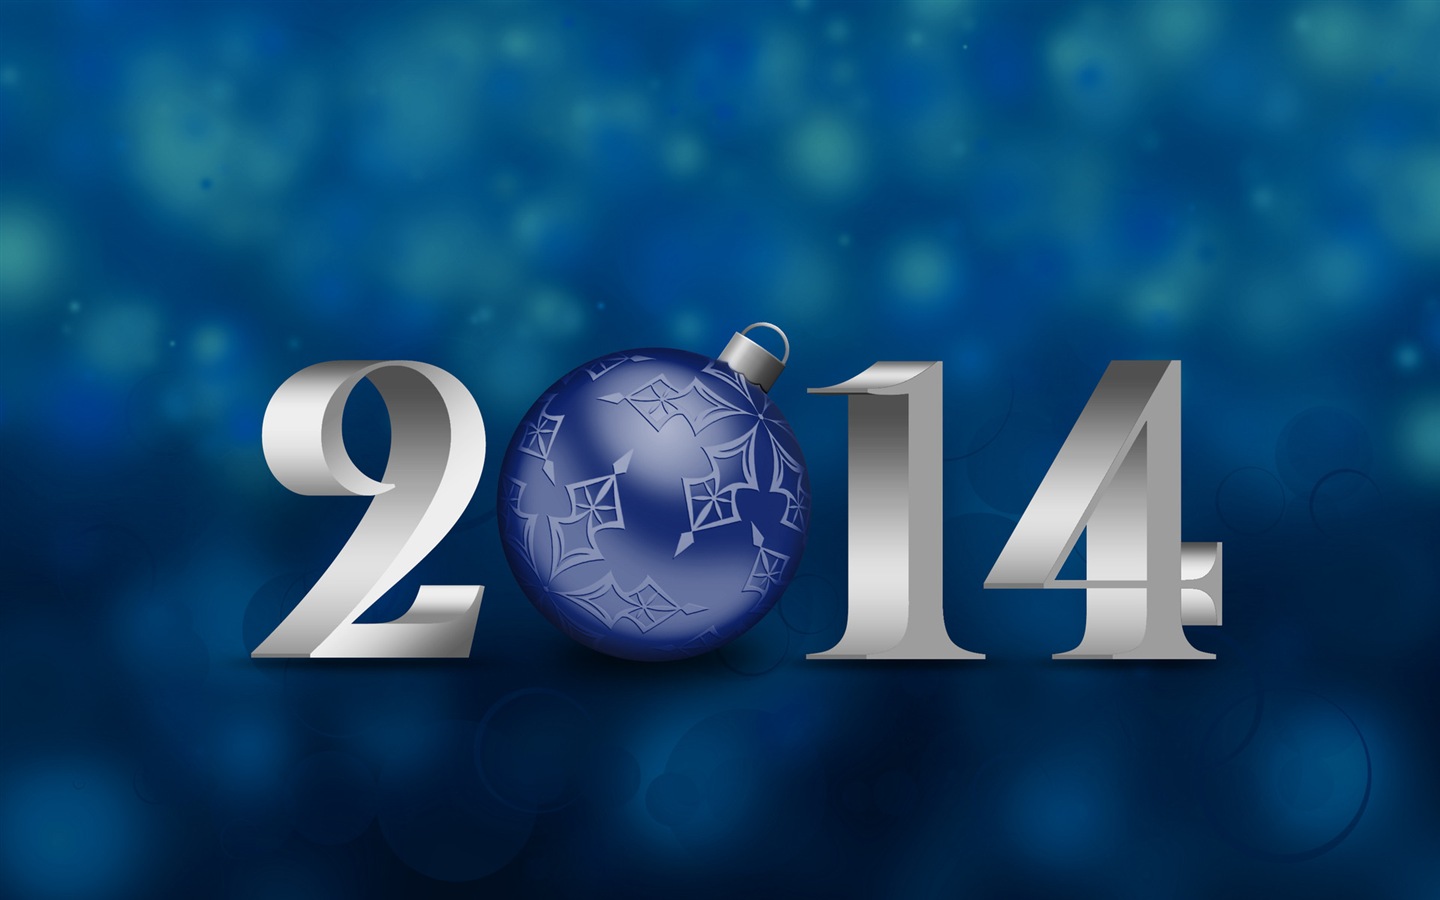 2014 New Year Theme HD Wallpapers (1) #5 - 1440x900